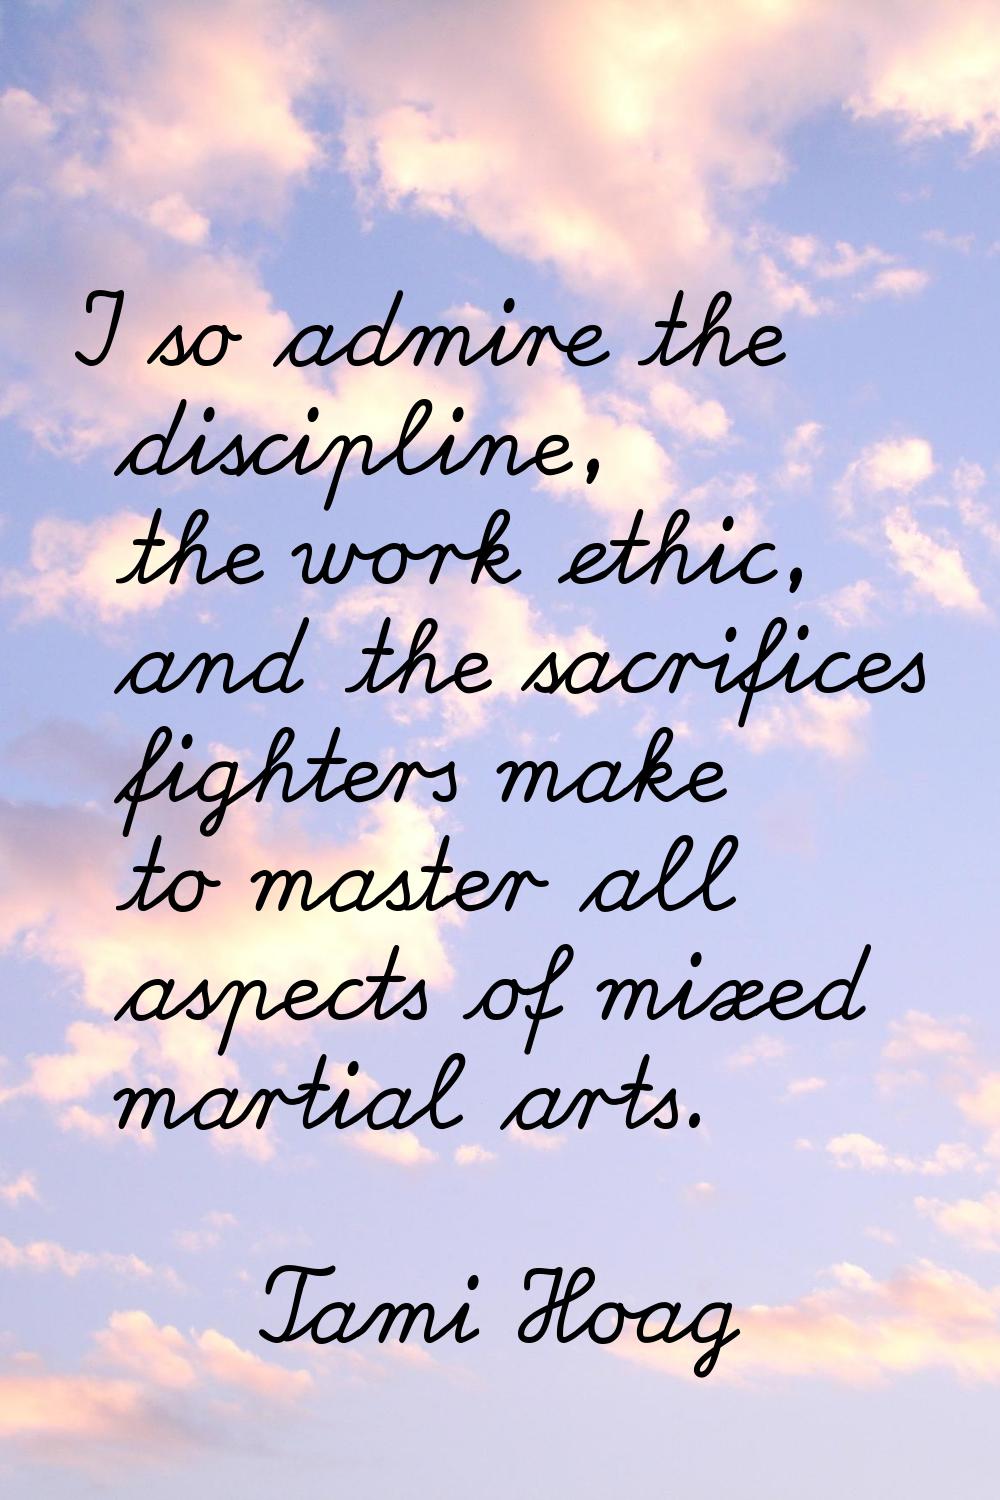 I so admire the discipline, the work ethic, and the sacrifices fighters make to master all aspects 